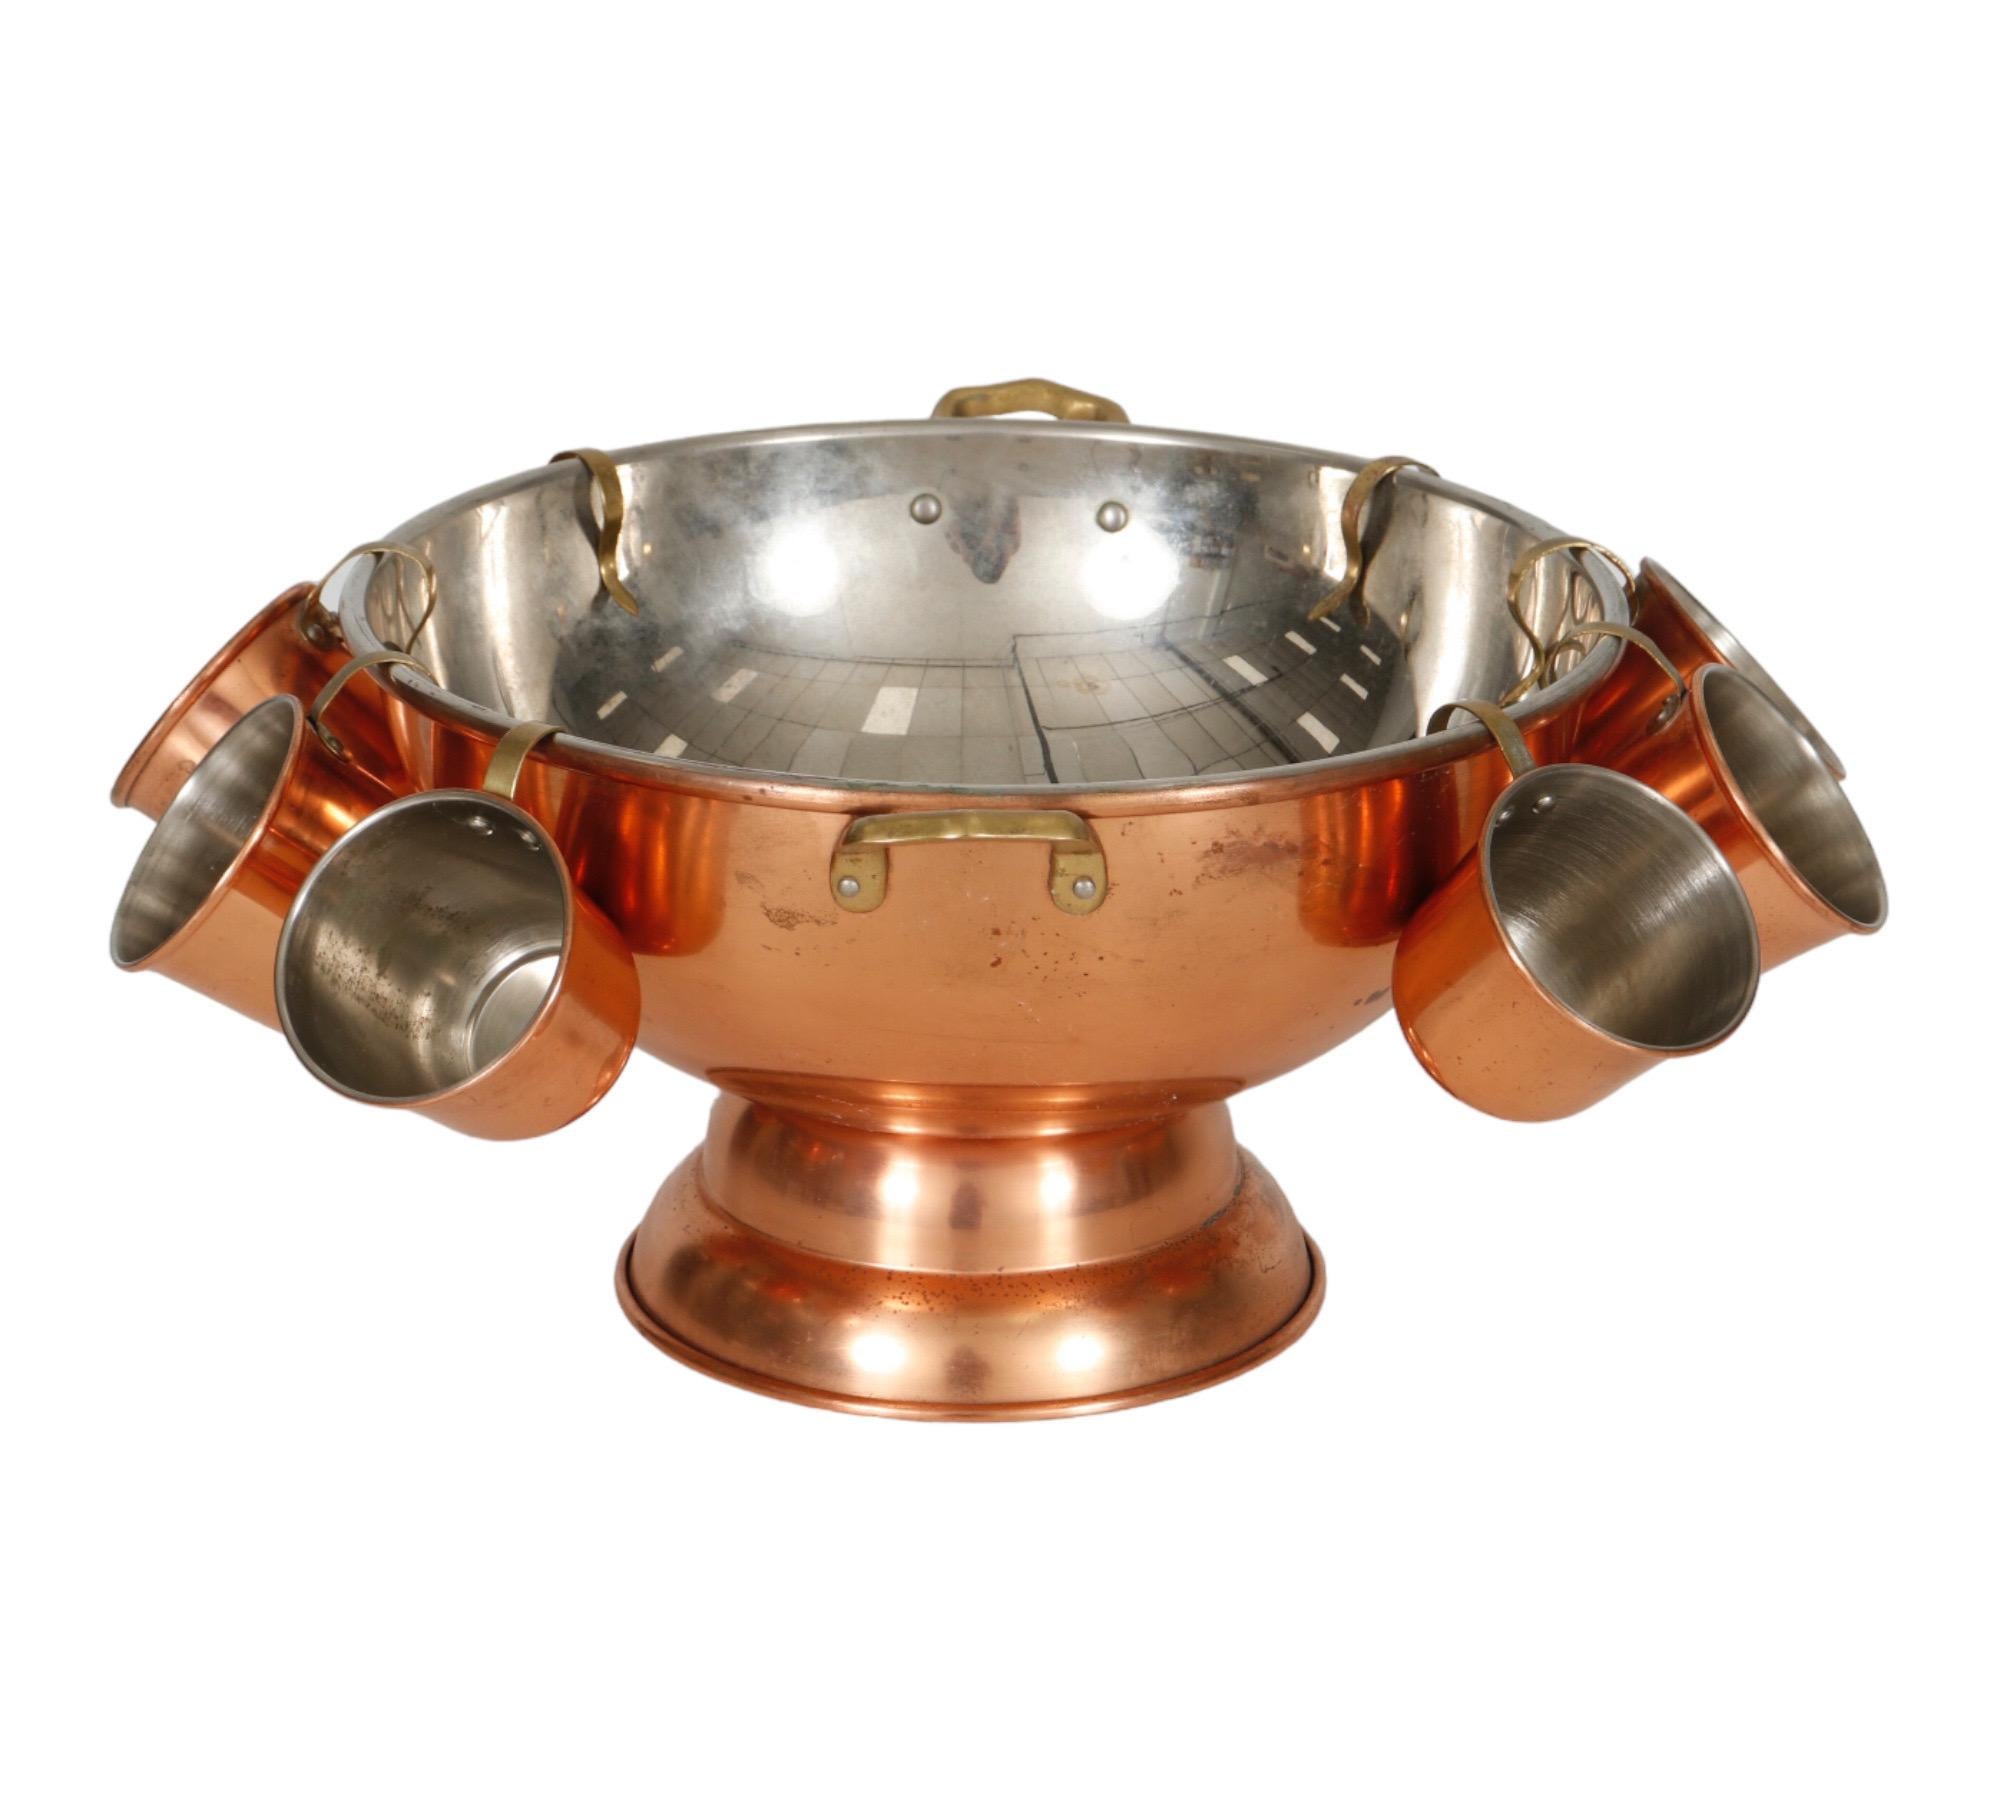 A copper punch bowl with a stainless-steel interior and two brass handles. Accompanied with eight copper mugs, also with stainless steel interiors, that hang on the edge of the bowl with brass handles. Bowl measures 12